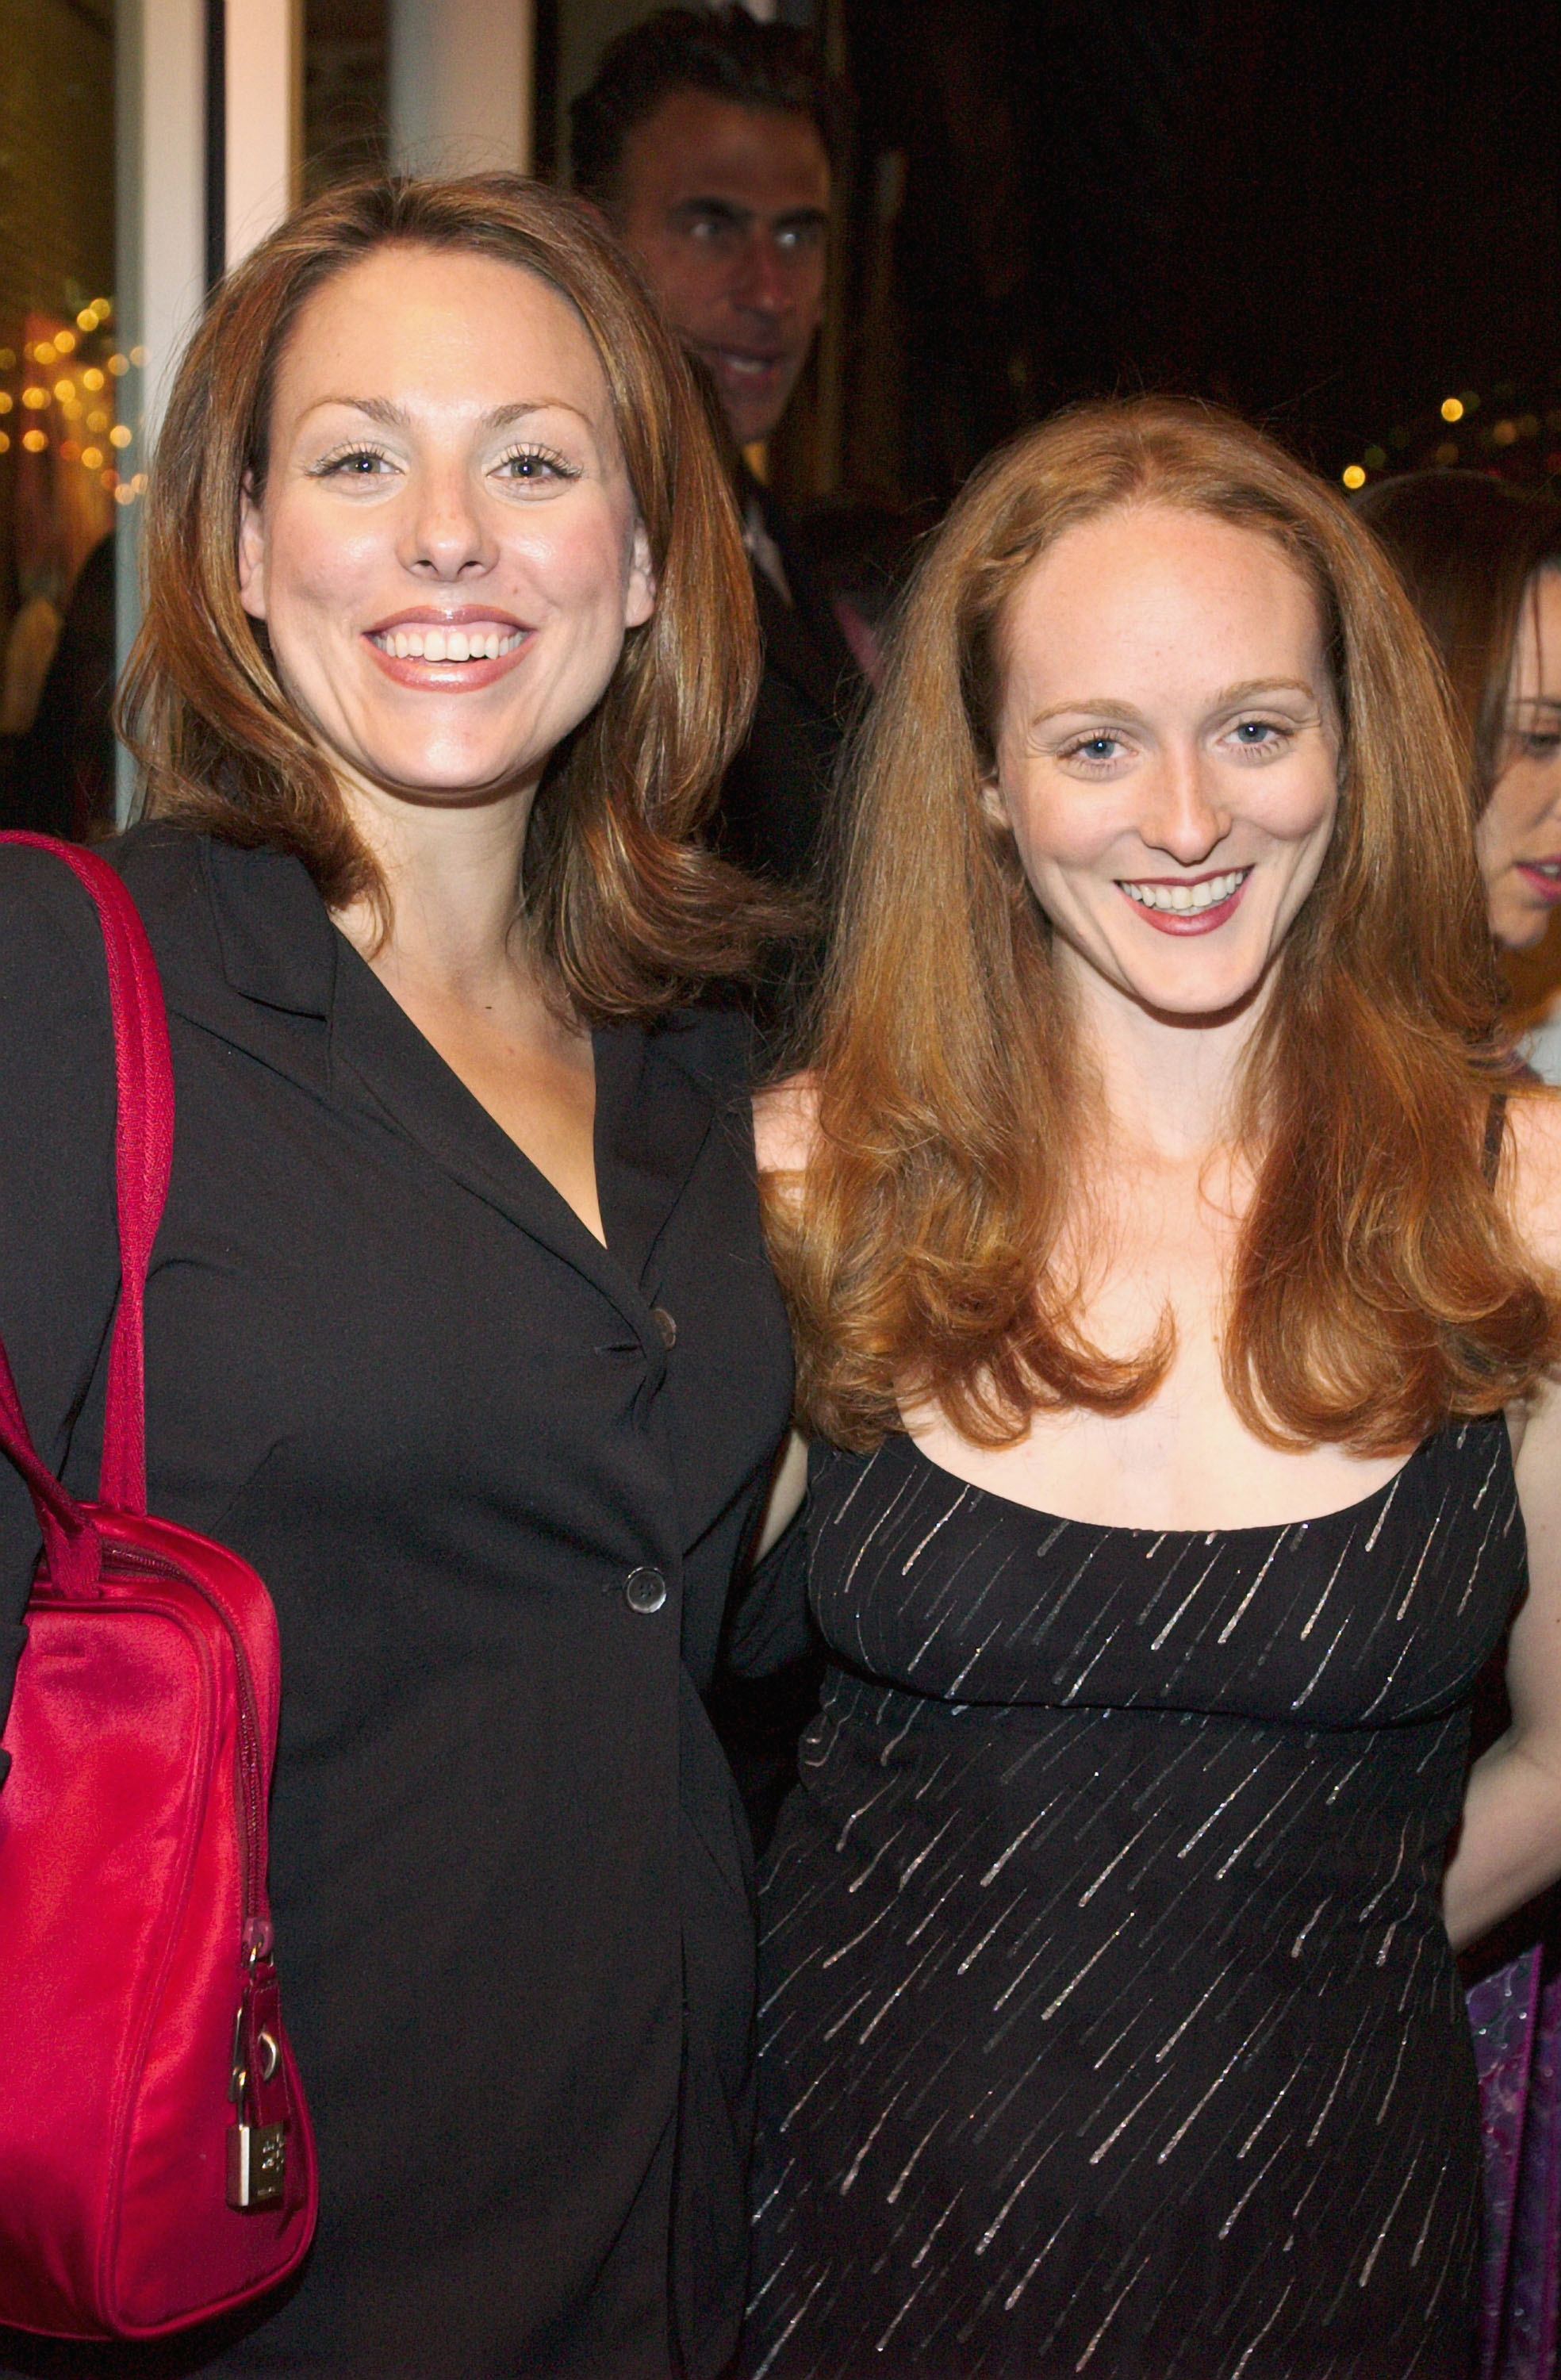 Joanna and Antonia Bennett at the launch party for David Adler's documentary "MAFIA NEW YORK" on September 12, 2002, in New York City. | Source: Getty Images